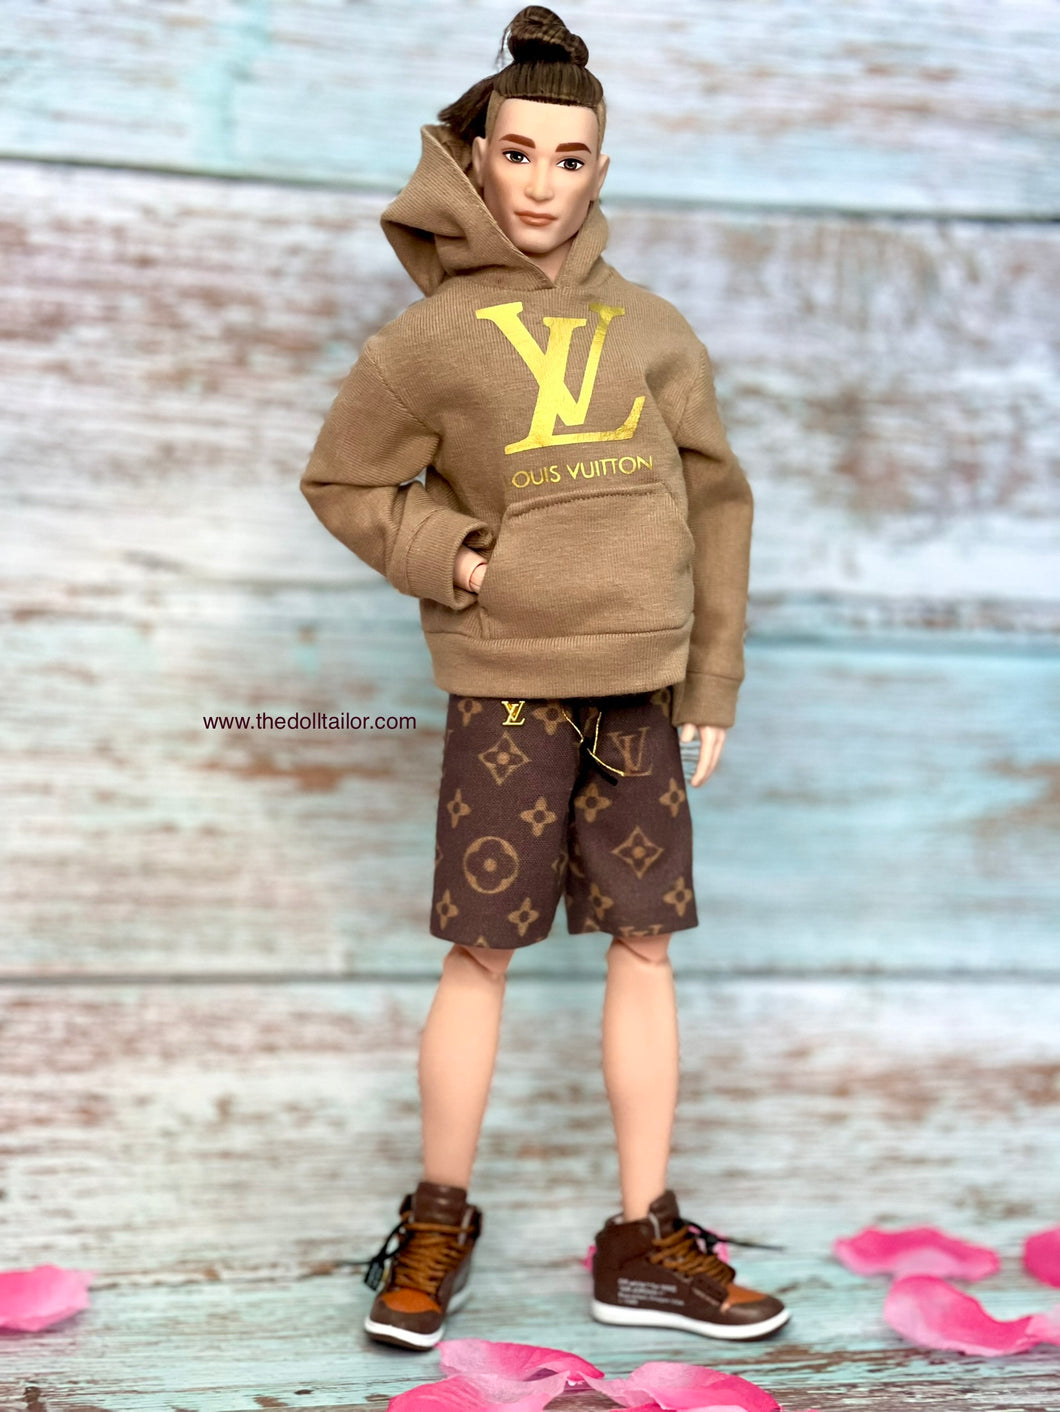 Ken doll luxurious brown hoodie and shorts